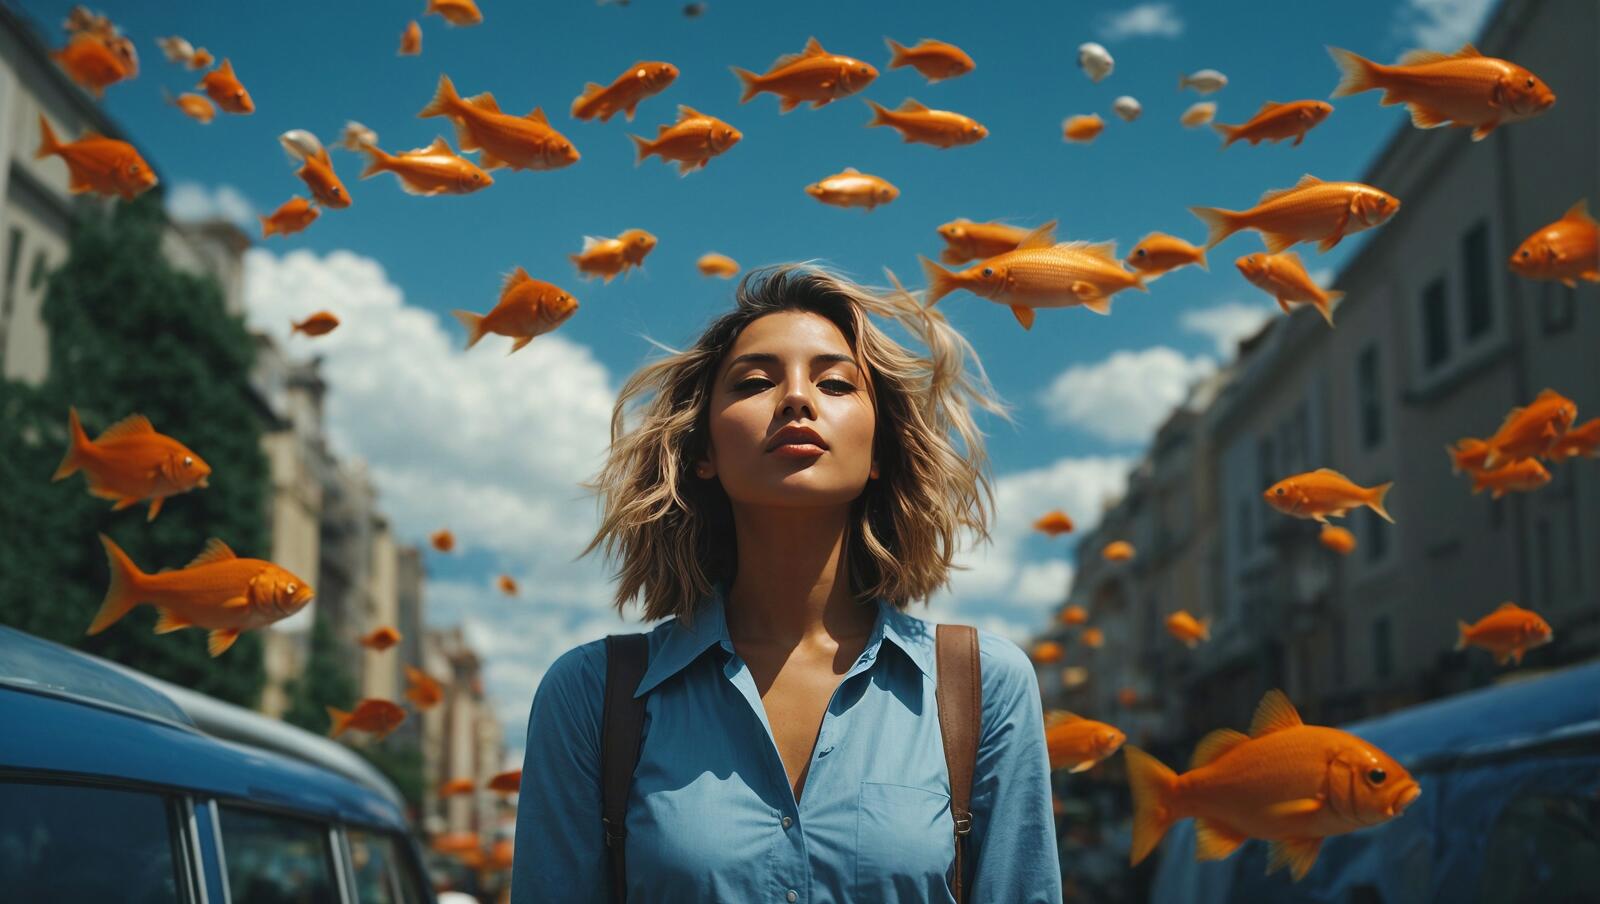 Free photo A woman stands beneath goldfish floating in the air.